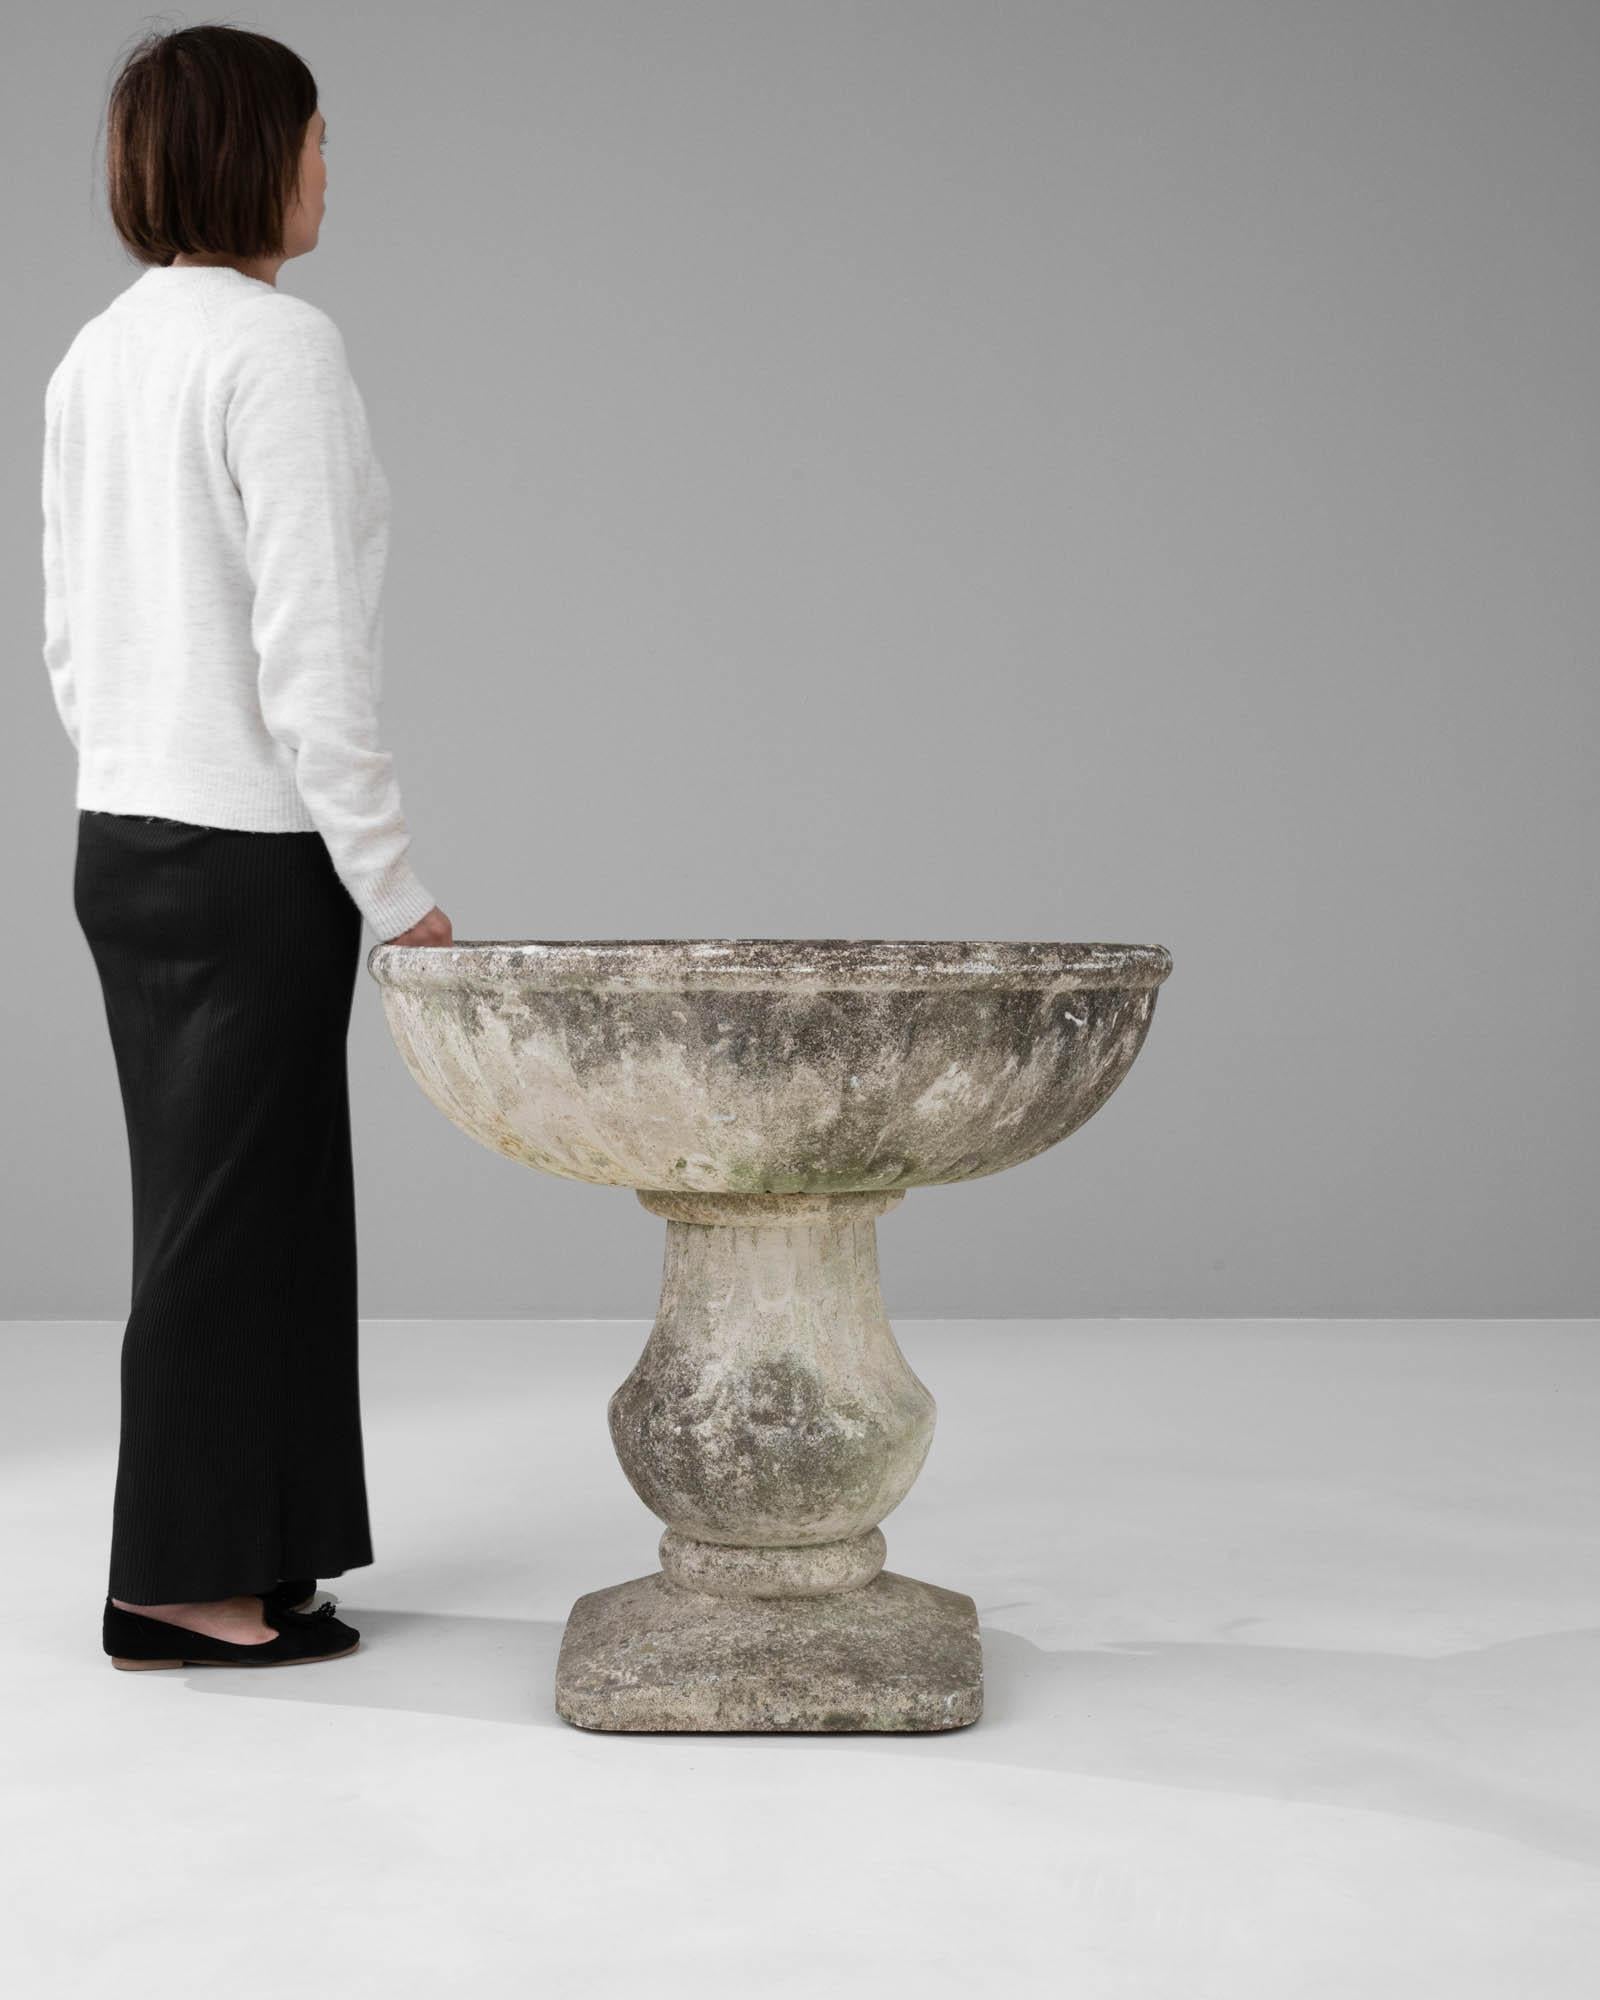 This 20th-century French concrete planter is an exquisite example of garden architecture, blending robust materiality with classical aesthetics. Its wide, open bowl rests upon an elegant, fluted pedestal, mirroring the style of ancient Grecian urns.